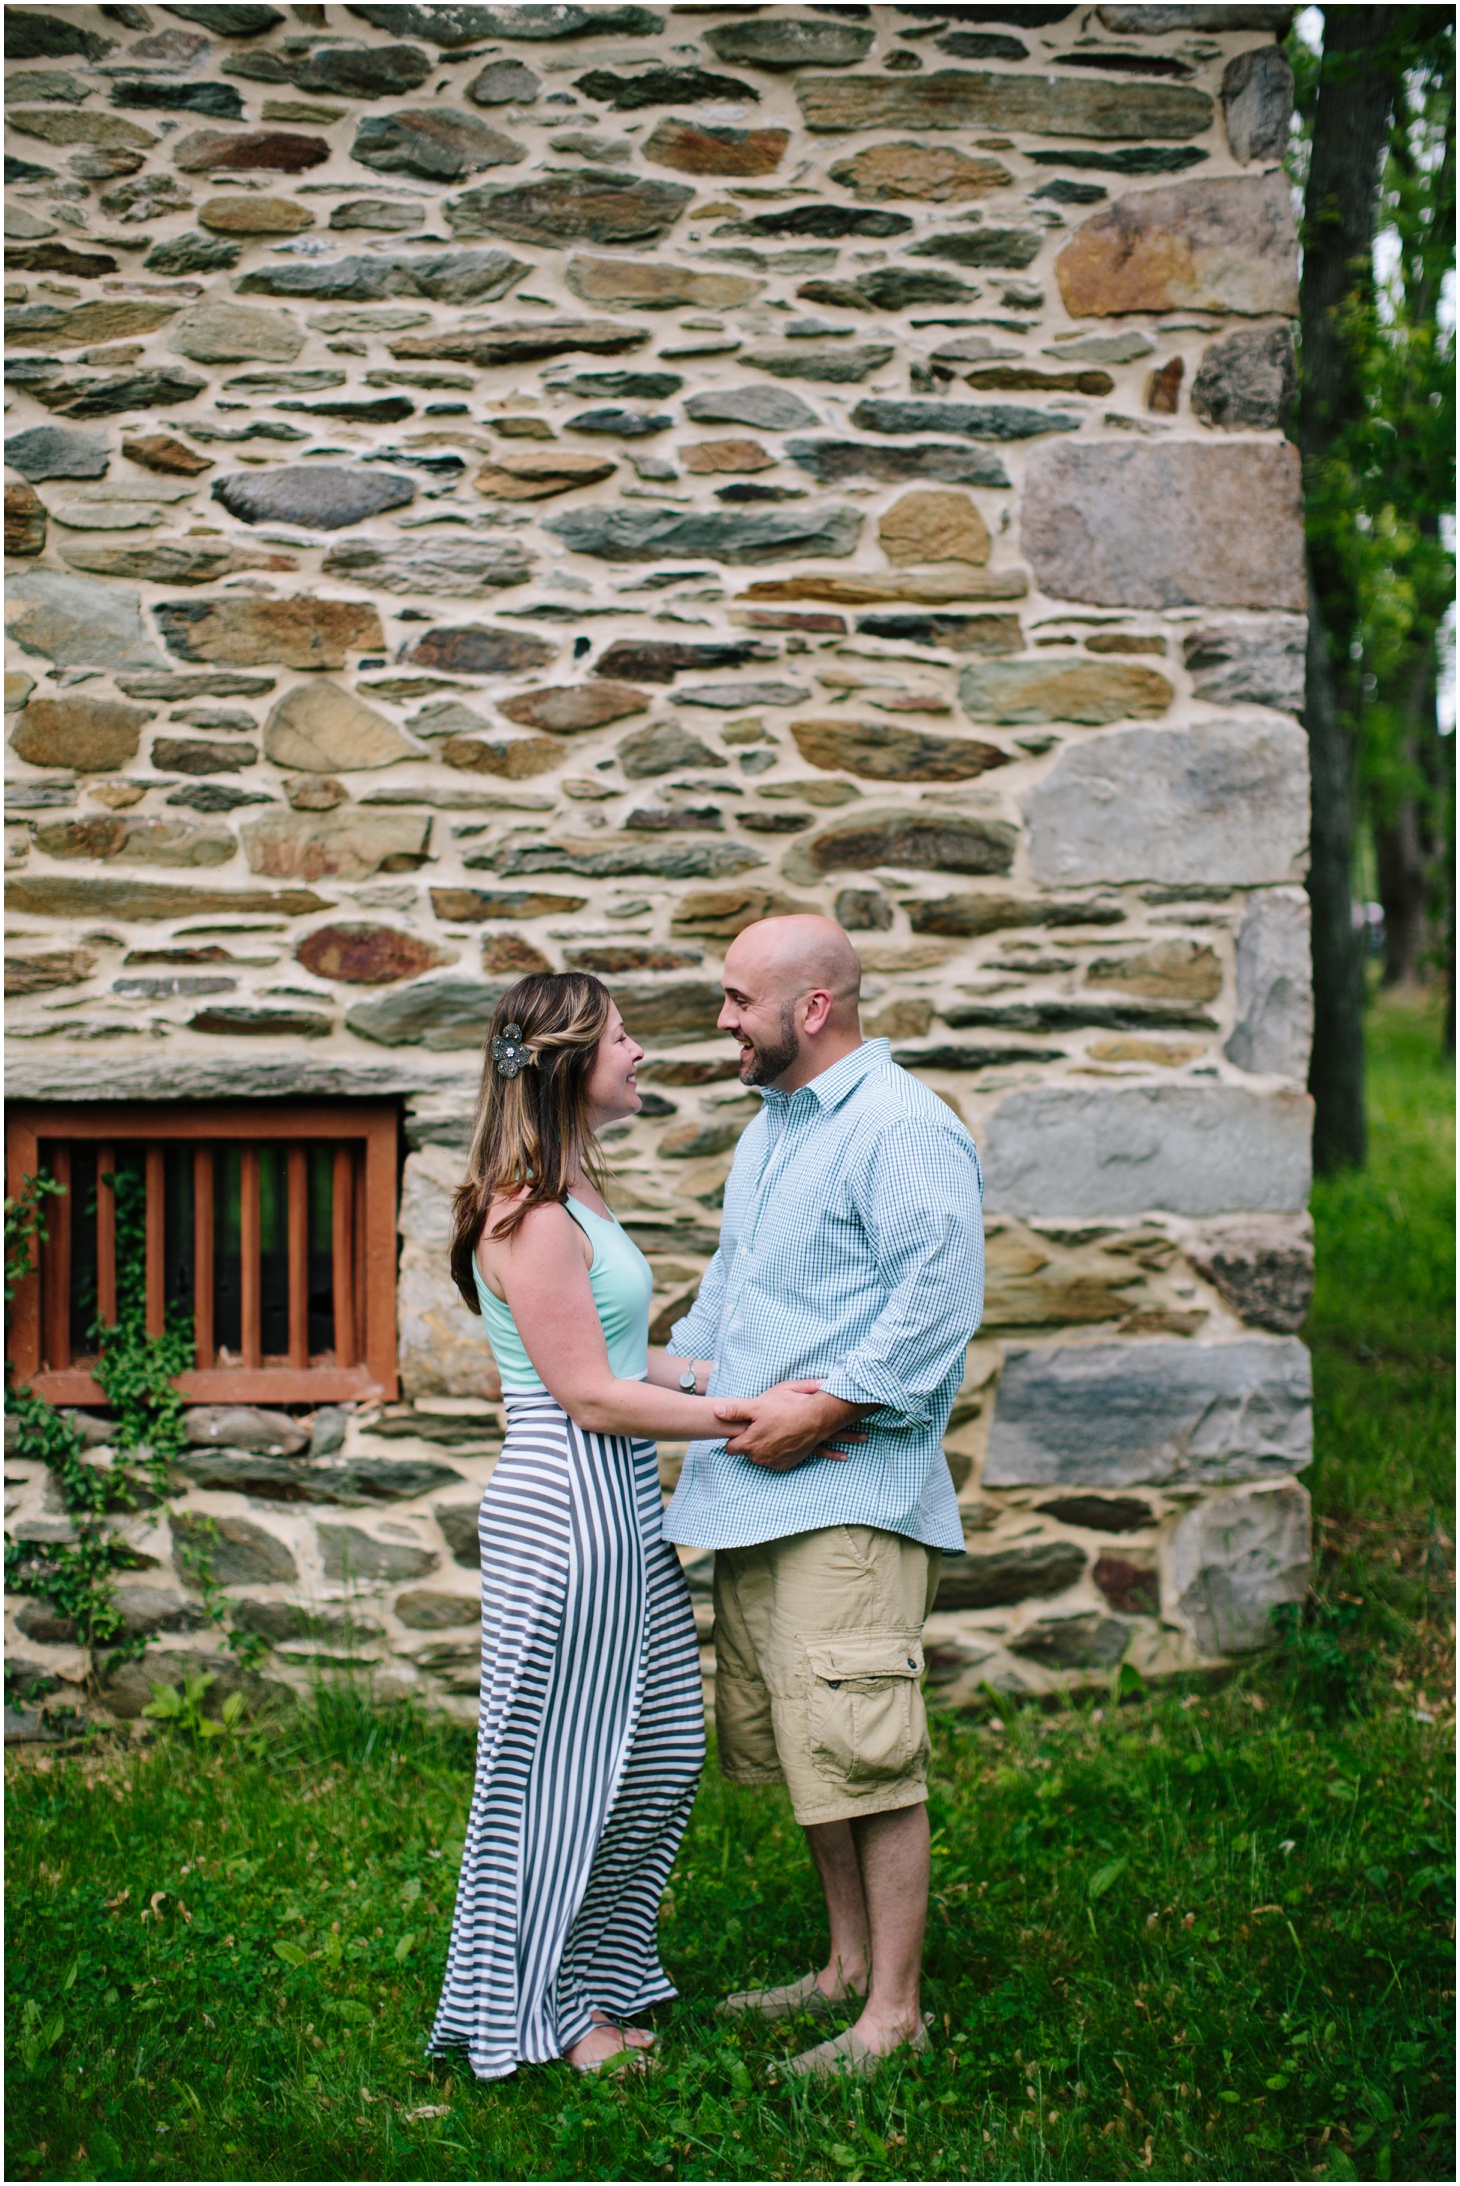 Surprise Proposal at Sunset Hills Winery by Sarah Bradshaw Photography